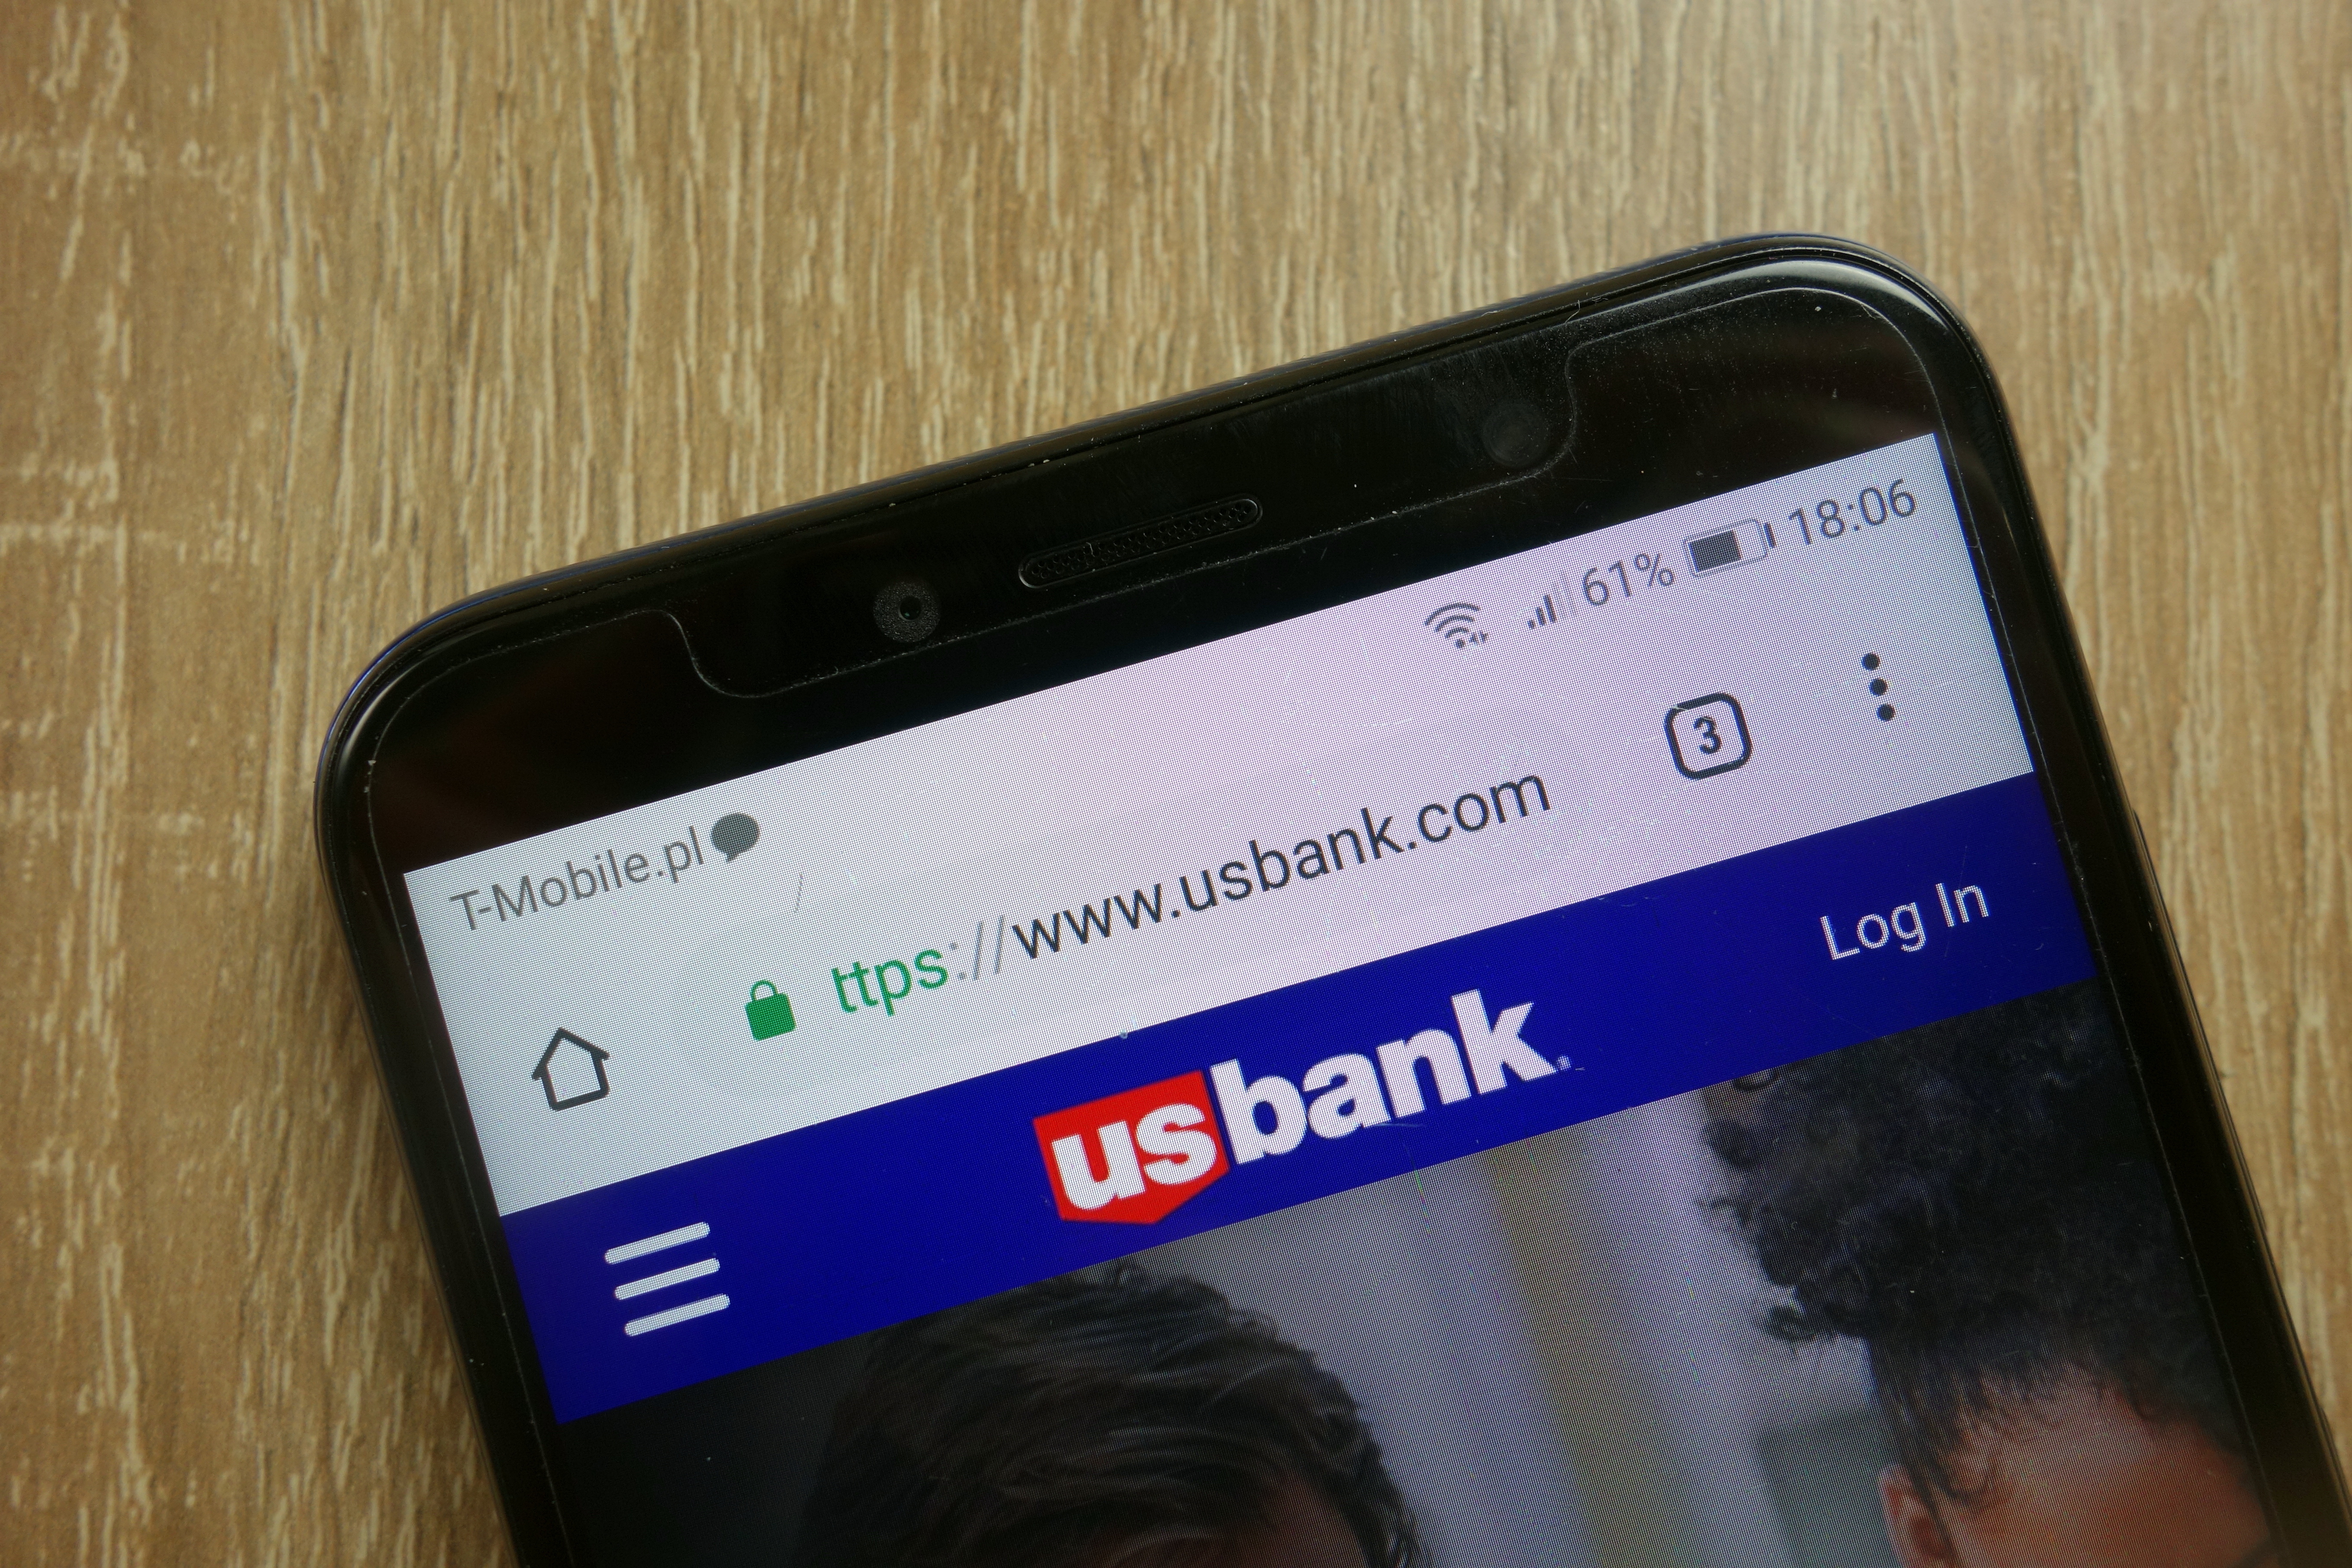 U.S. Bank is a reliable financial company. Source: Adobe Stock.